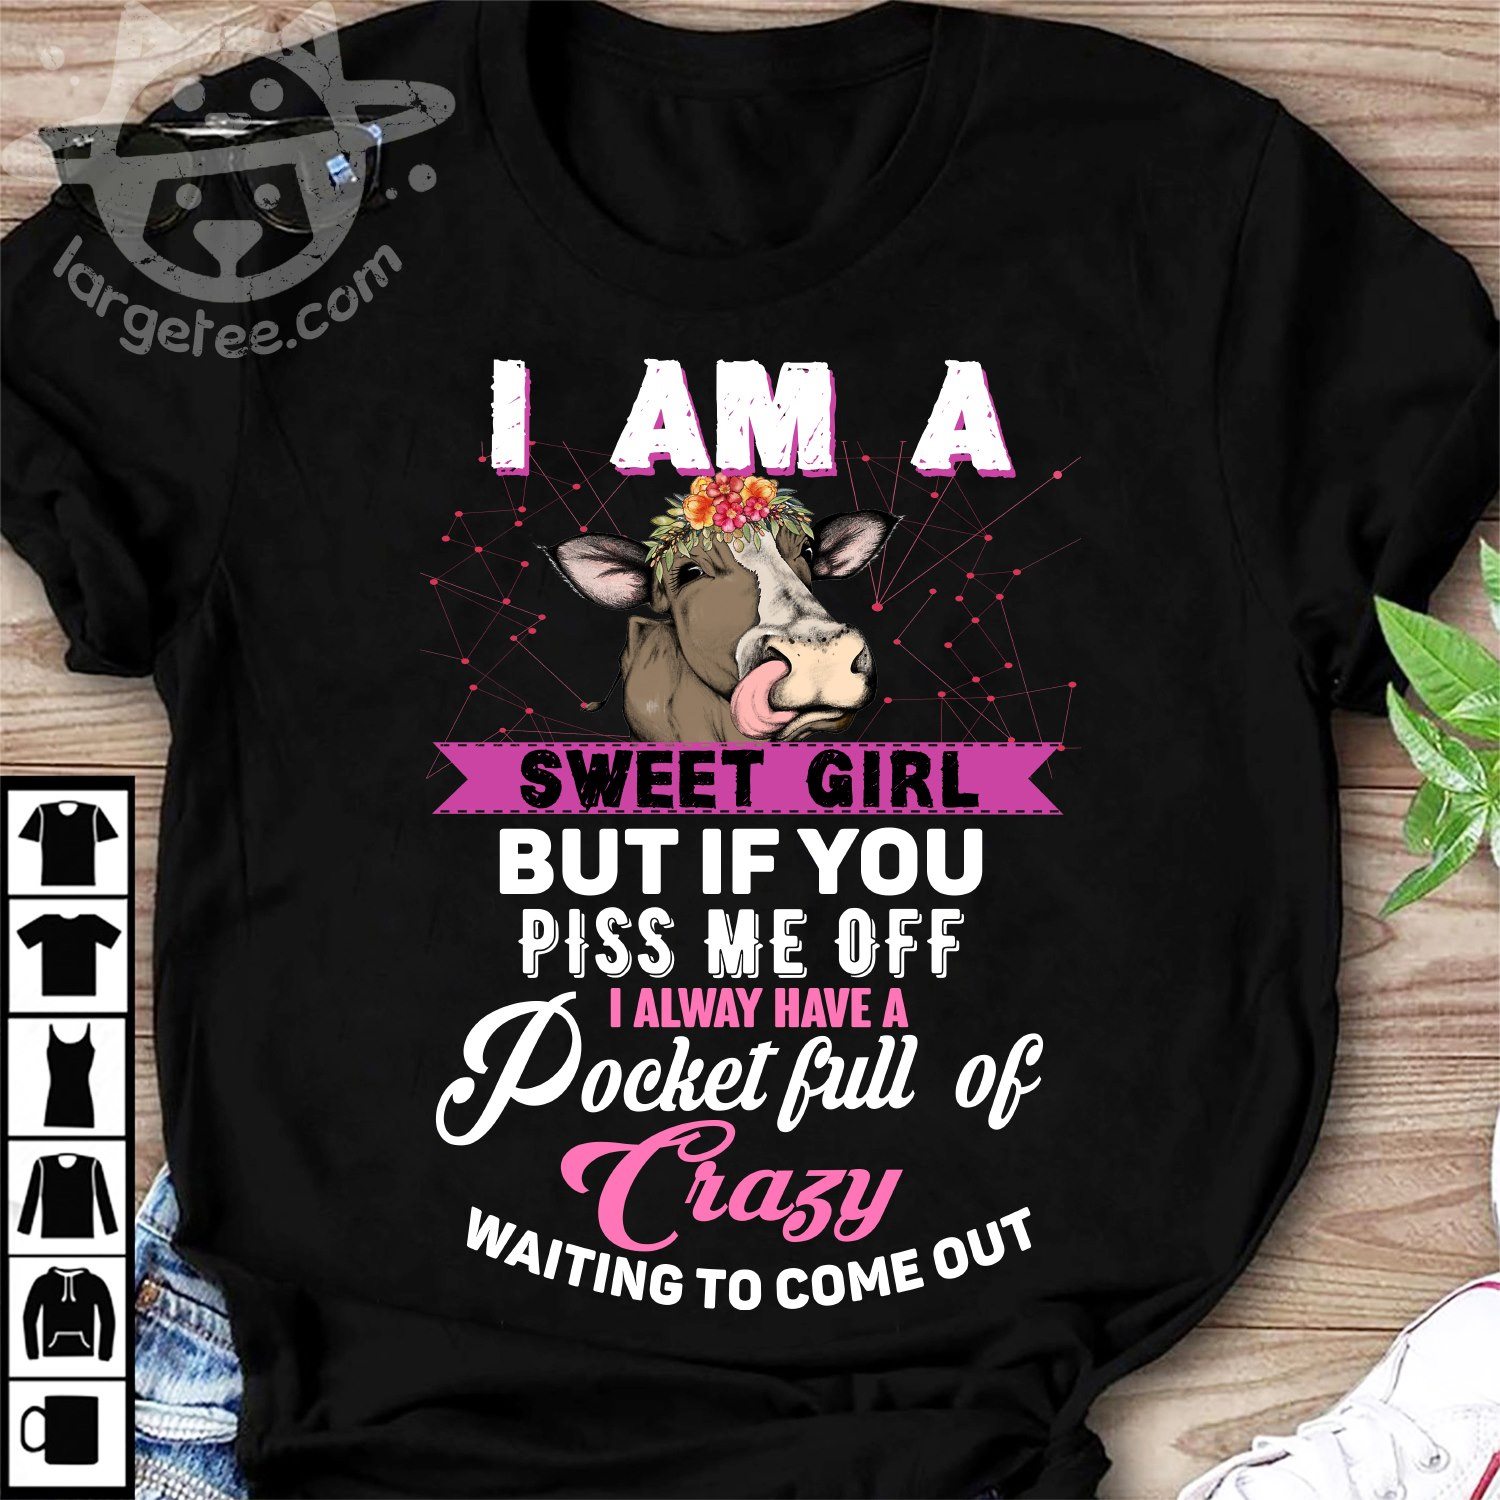 I am a sweet girl but if you piss me off I always have a pocket full of crazy